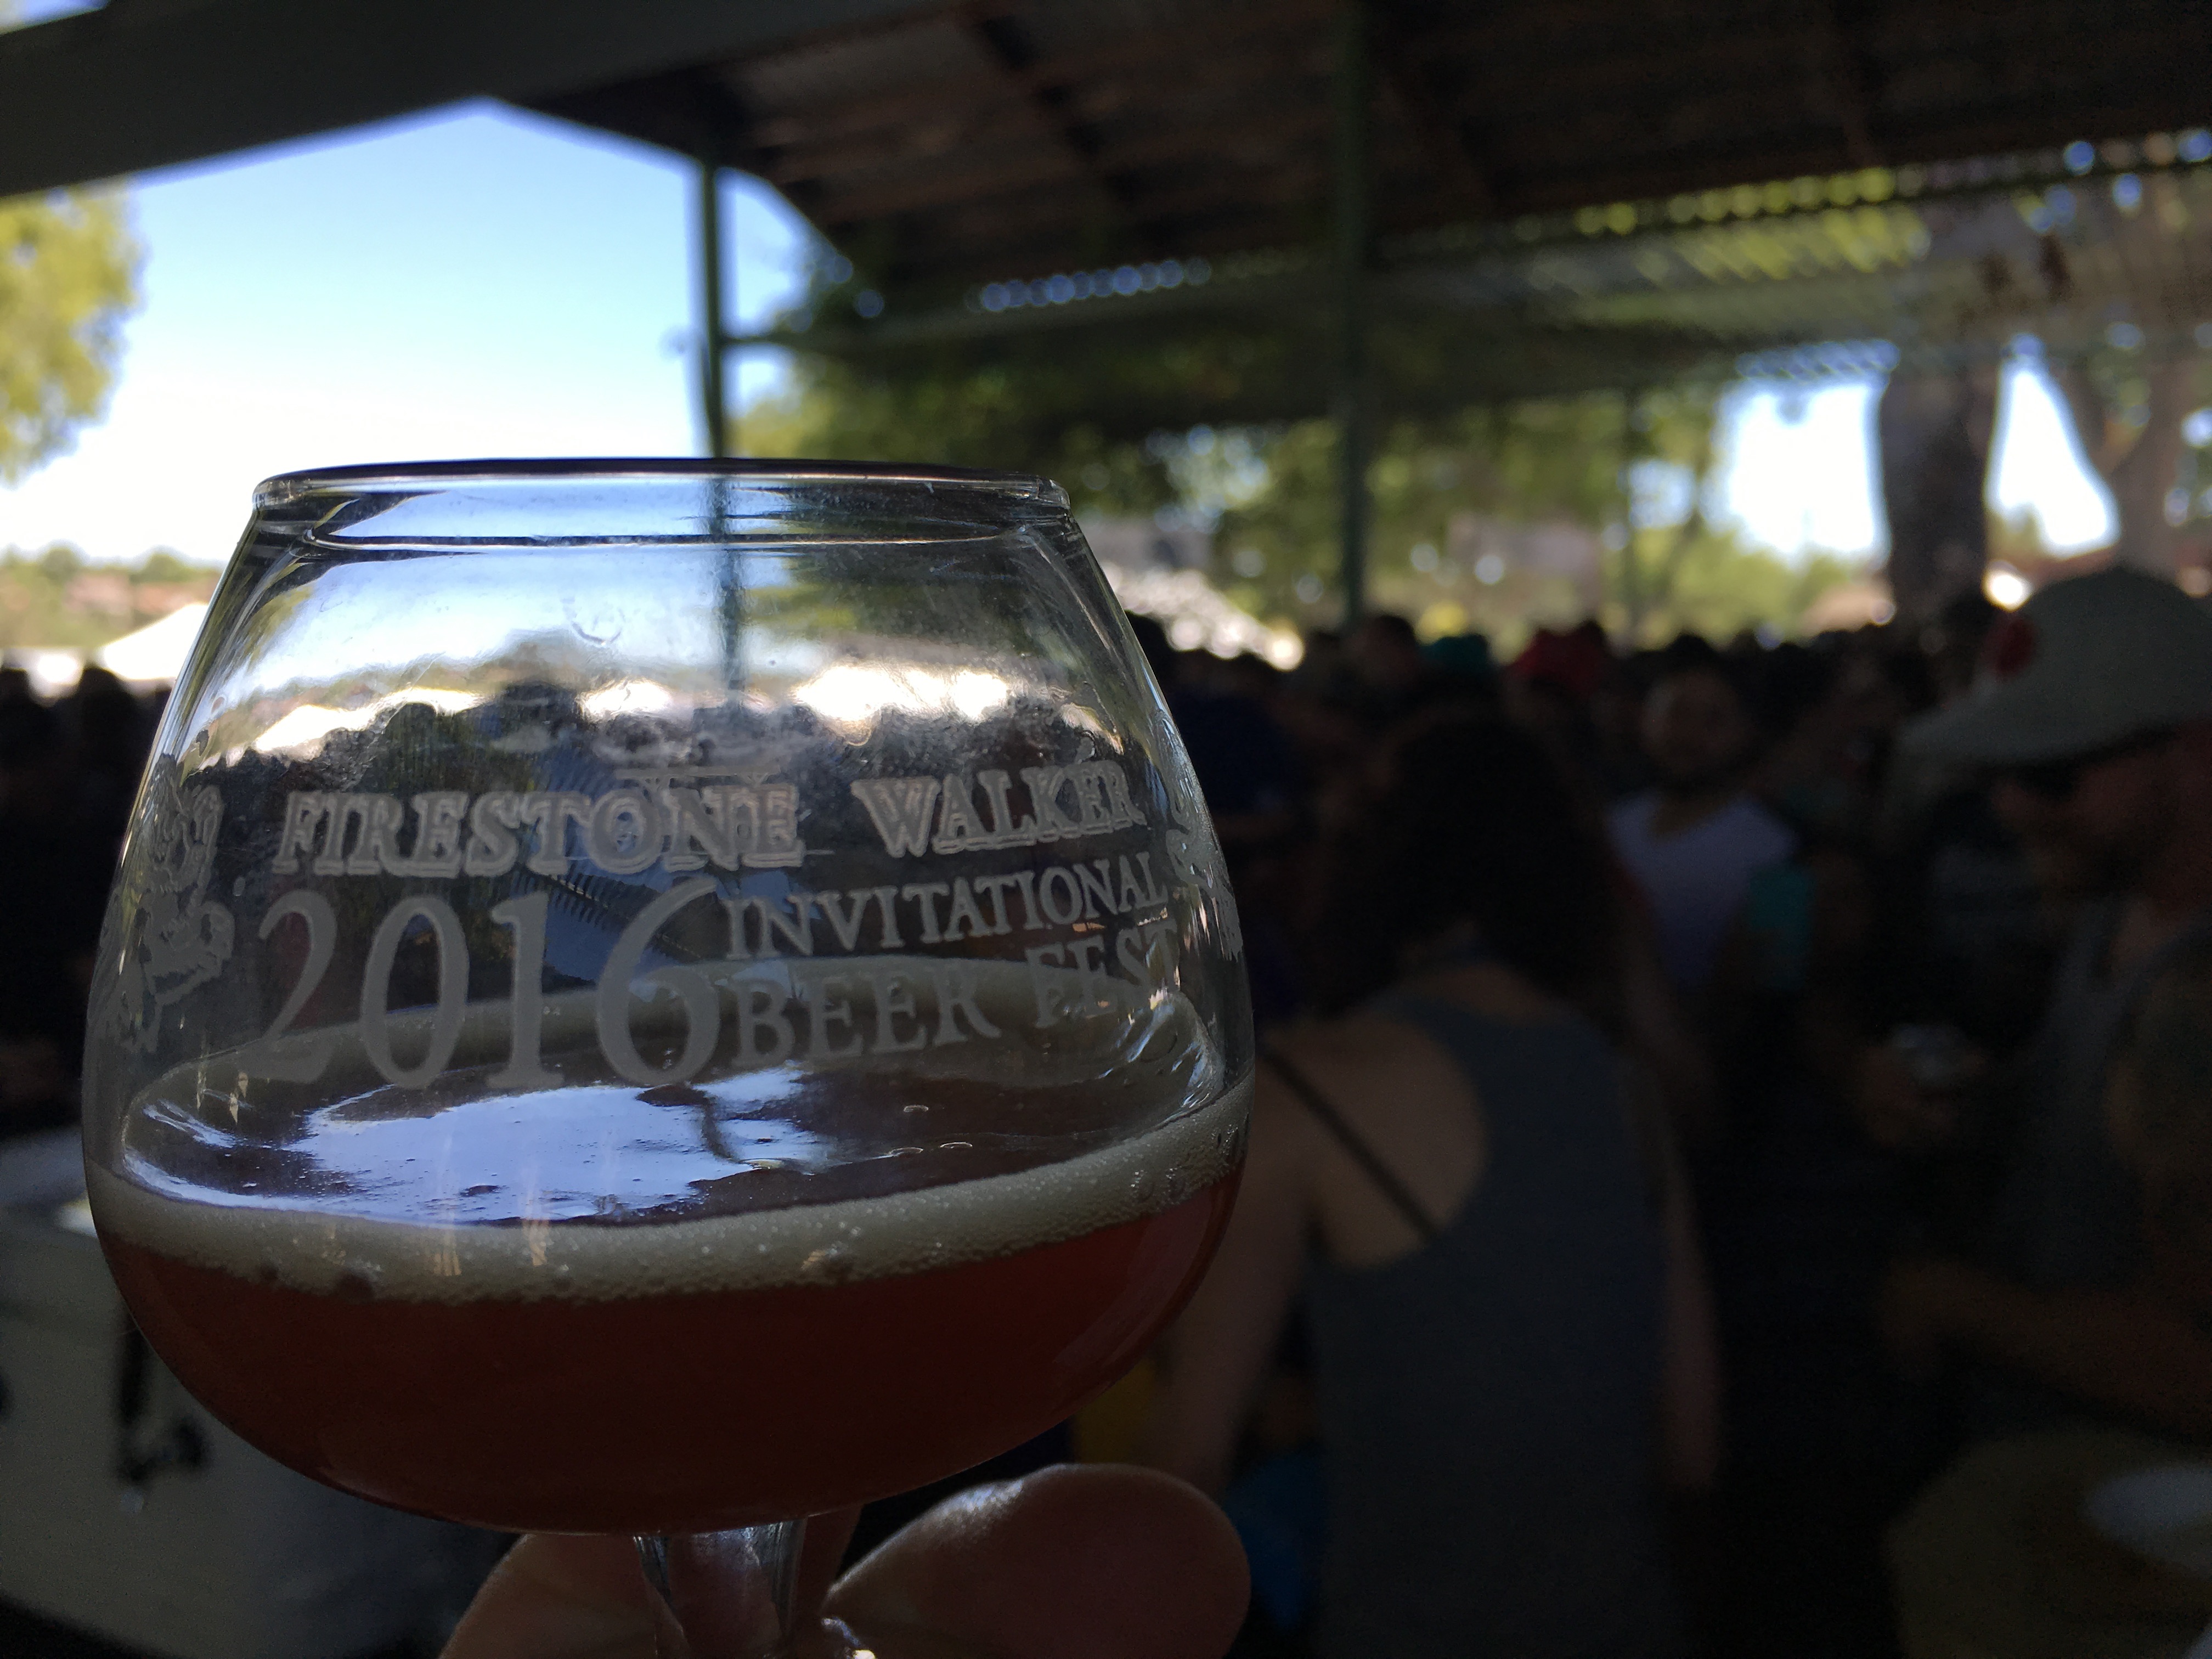 A pour of the Russian River 2009 Supplication at the 2016 Firestone Walker Invitational Beer Fest.